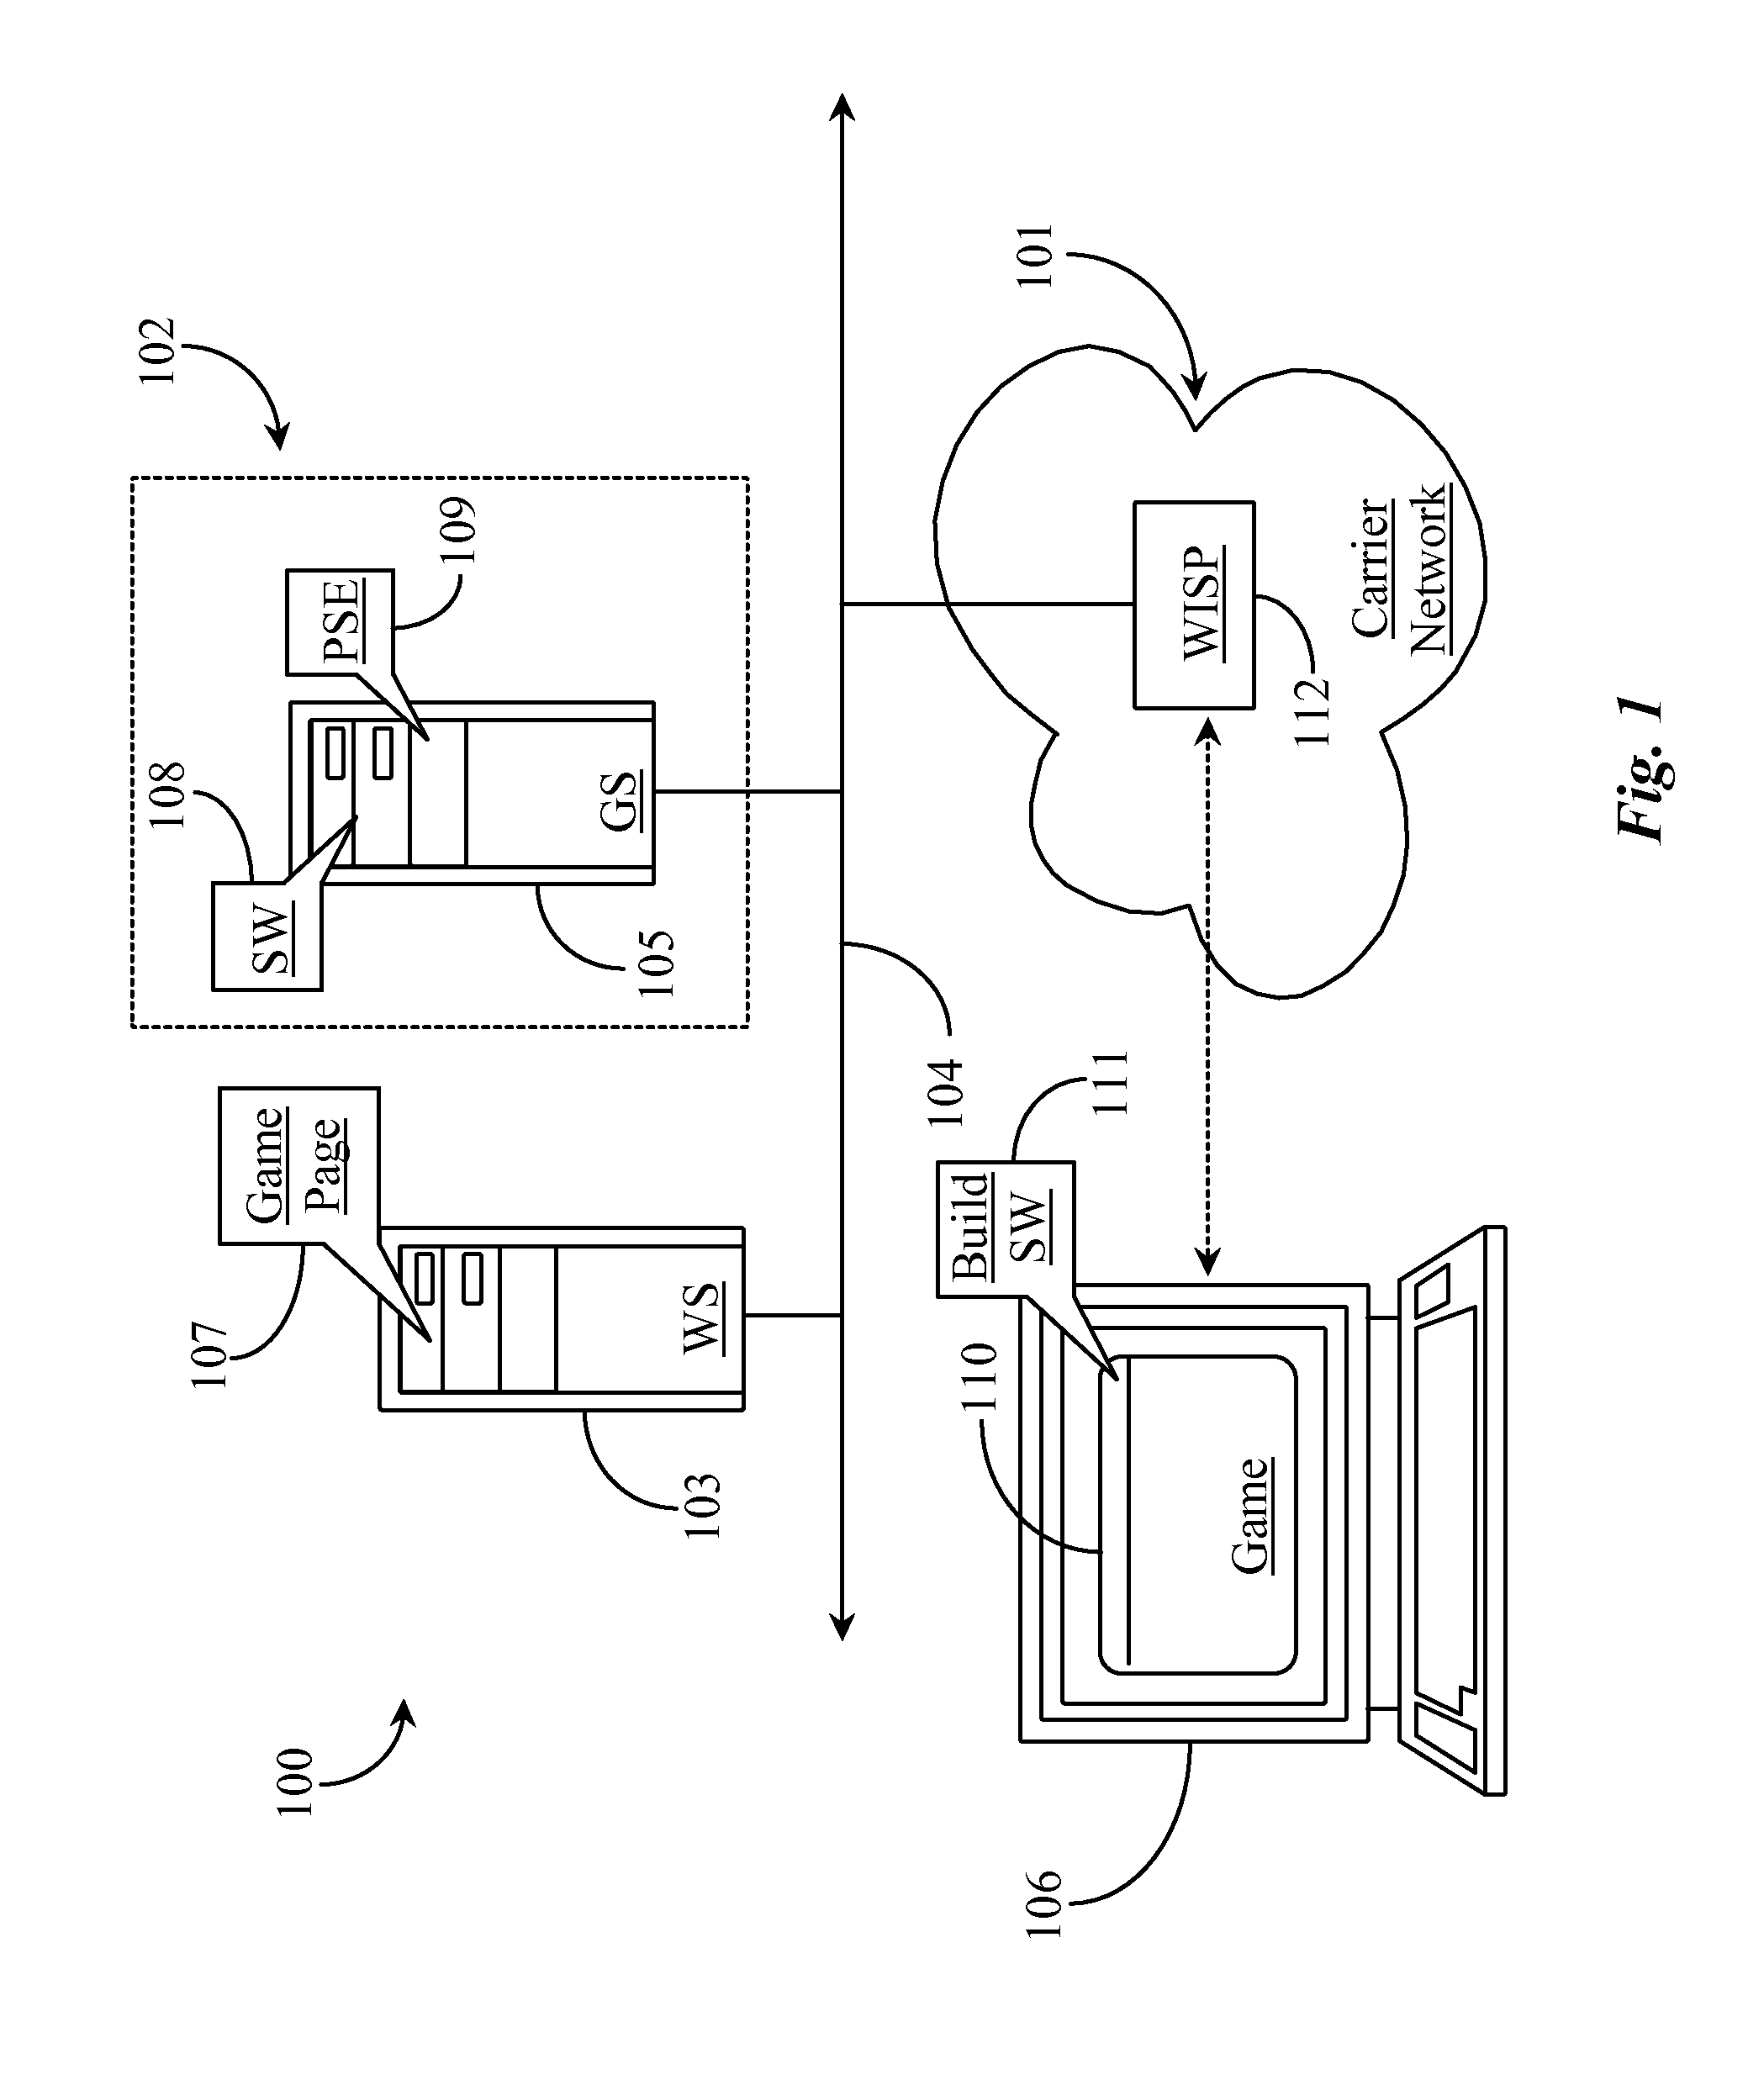 Method and Apparatus for Rendering and Modifying Terrain in a Virtual World